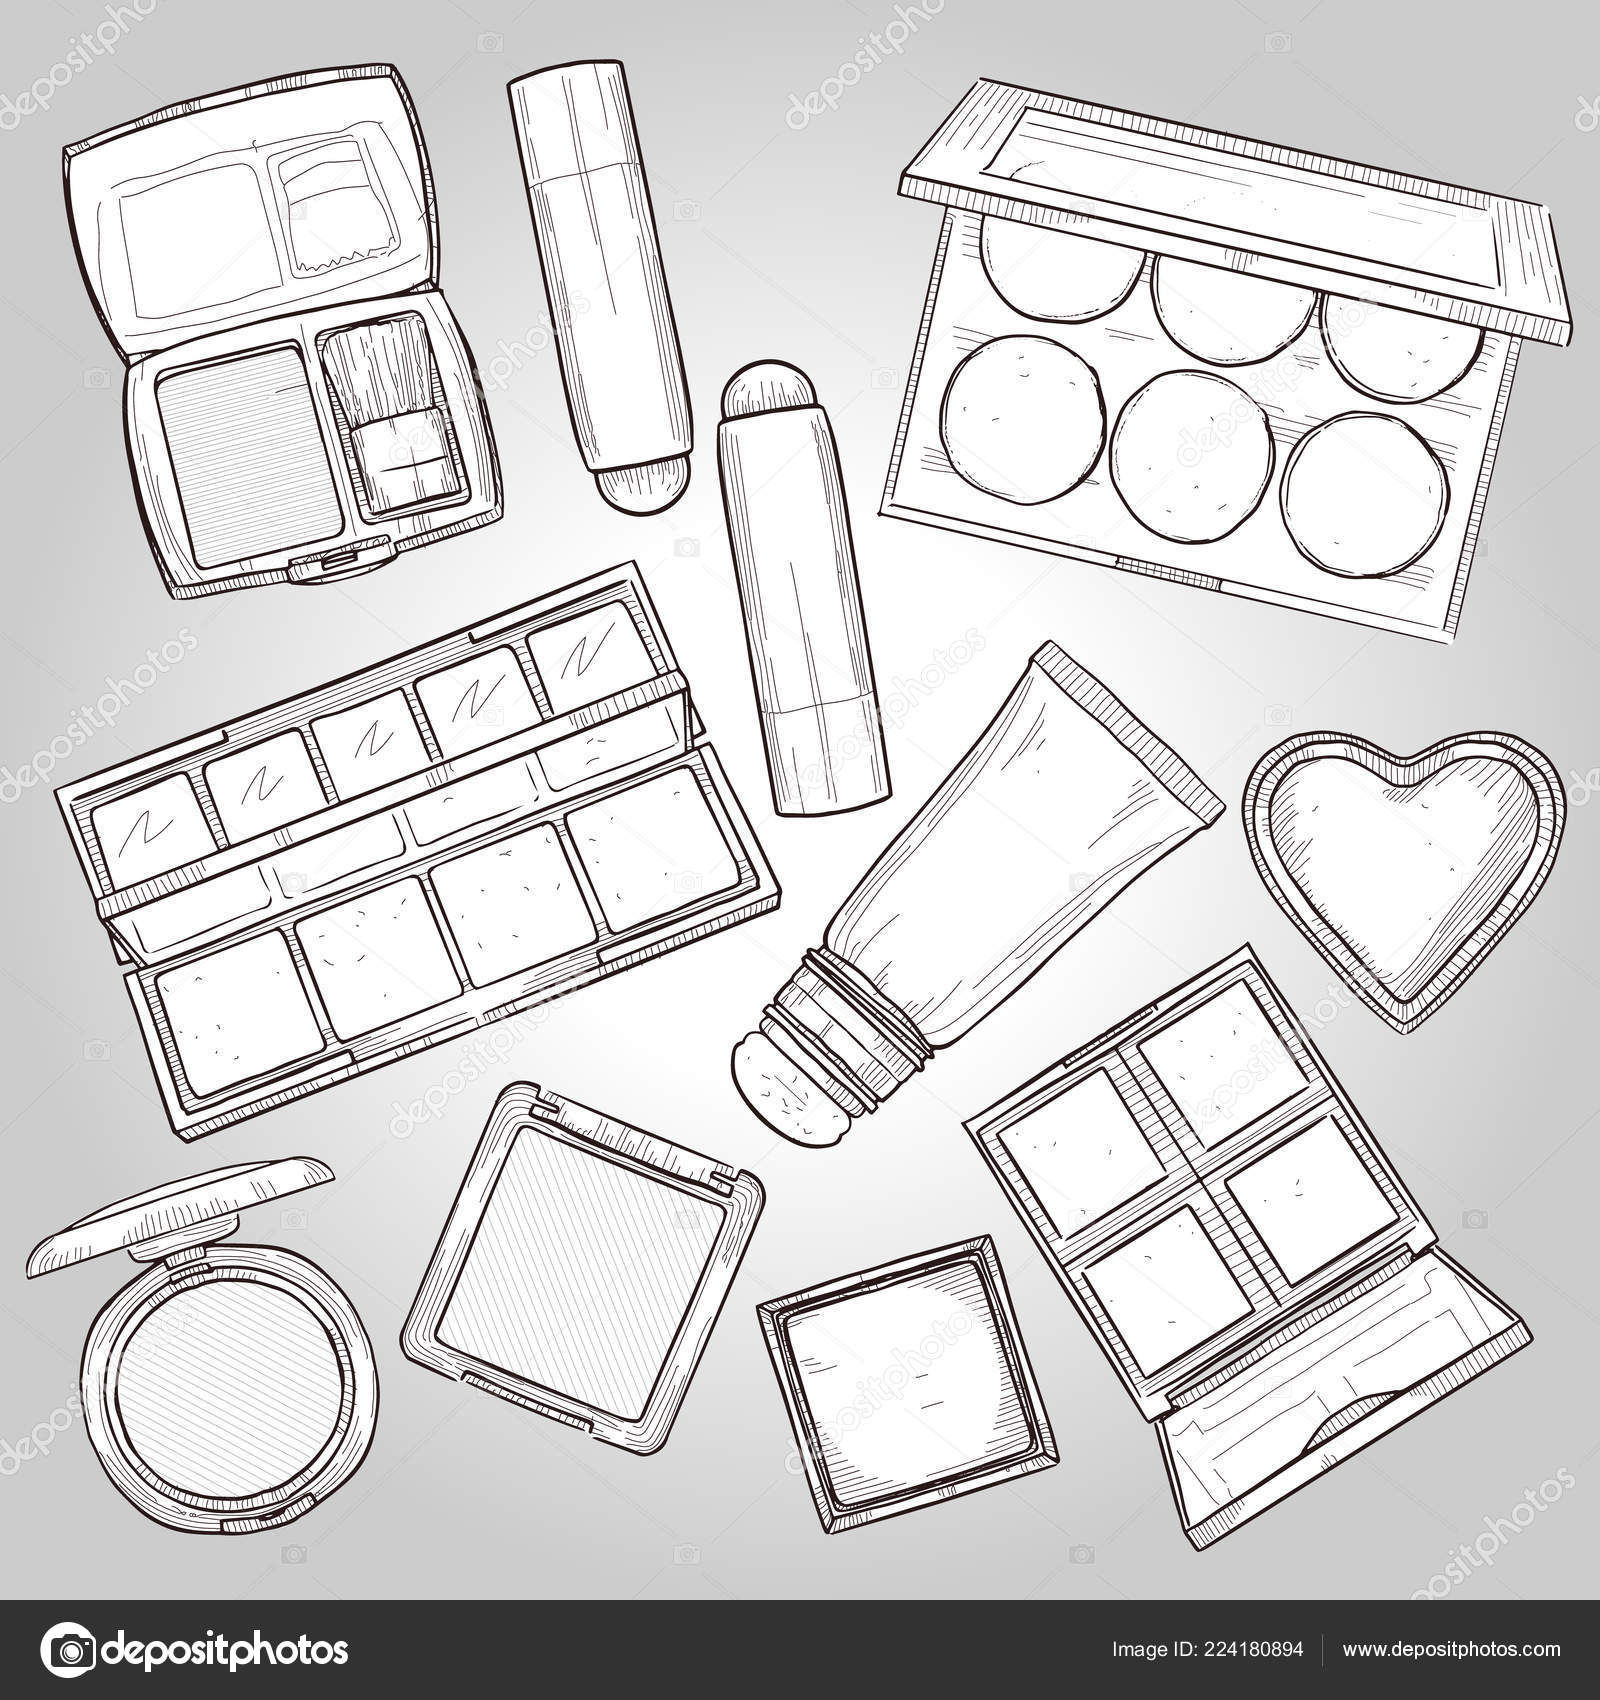 Makeup Set Coloring Pages for Kids – How to Draw and Color… | Flickr